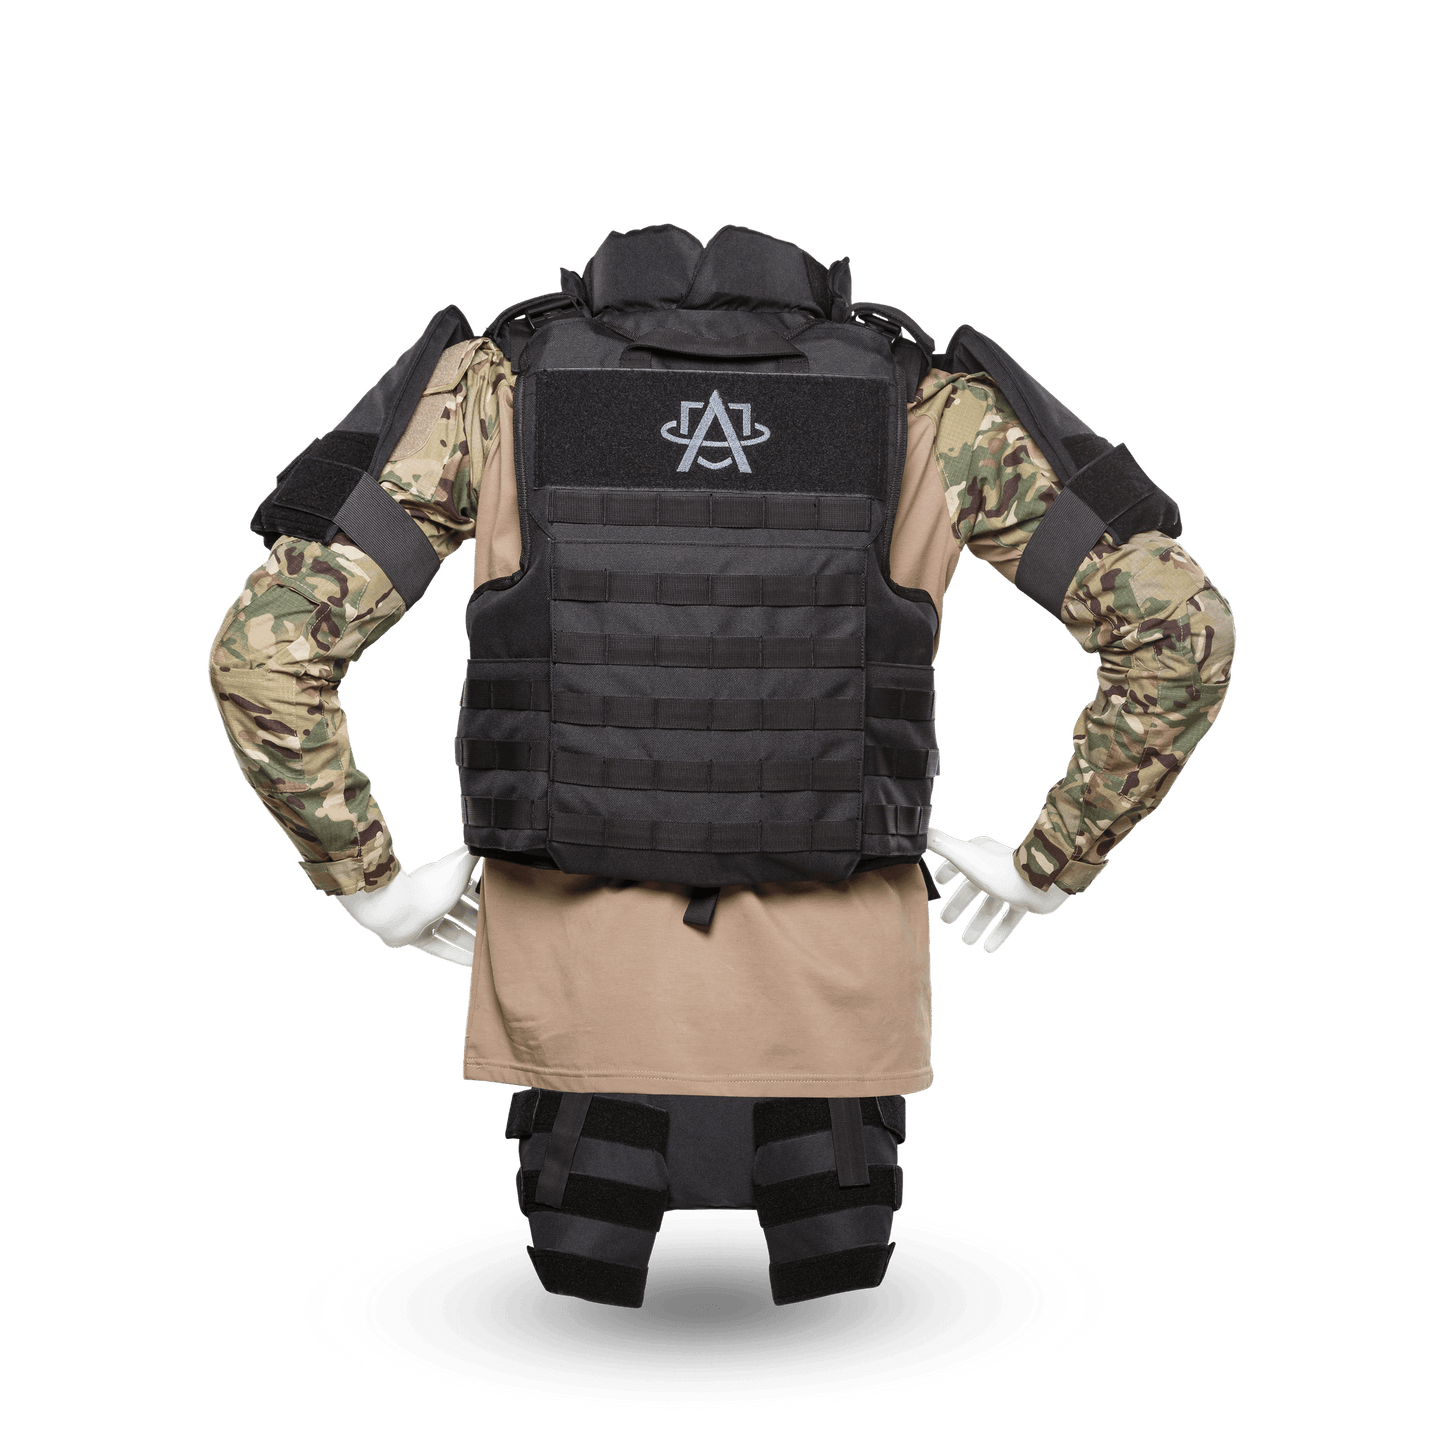 RBS™ Full Body Armor Suit with Chest, Shoulder, Leg, Groin, and Neck Armor - Raid Boss Special